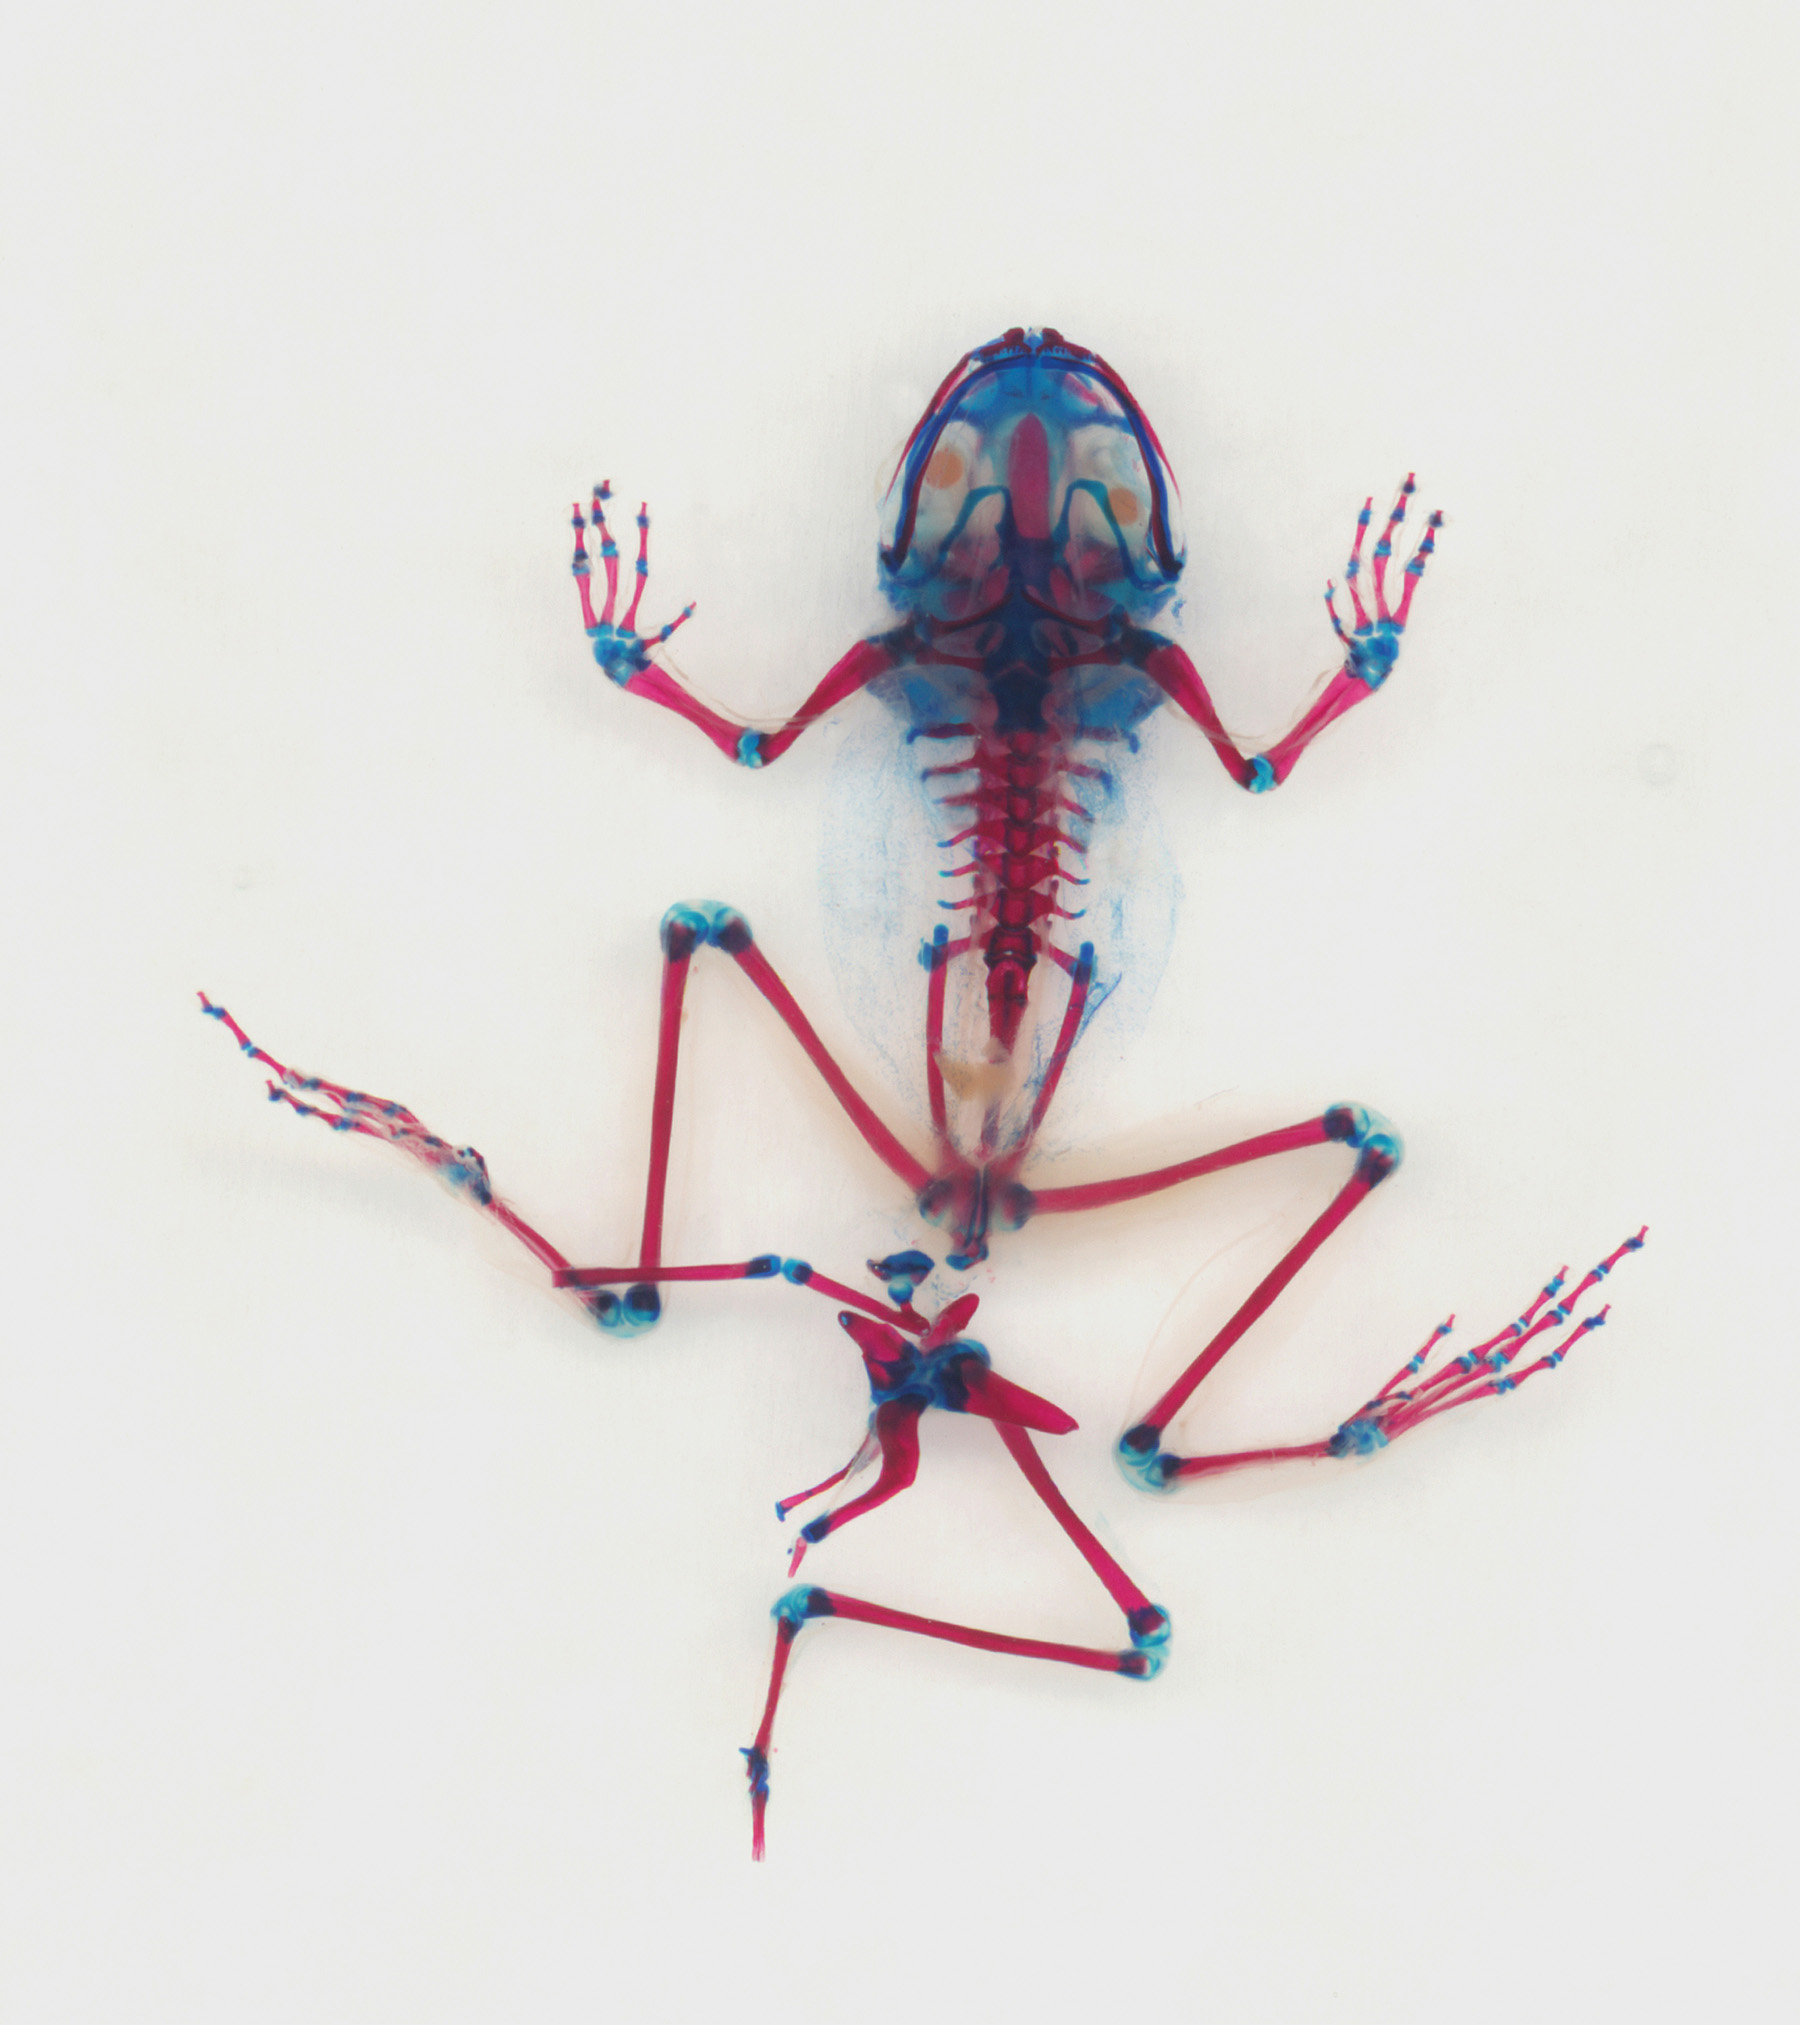 xray image of frog with  bones and joints highlighted in red and blue